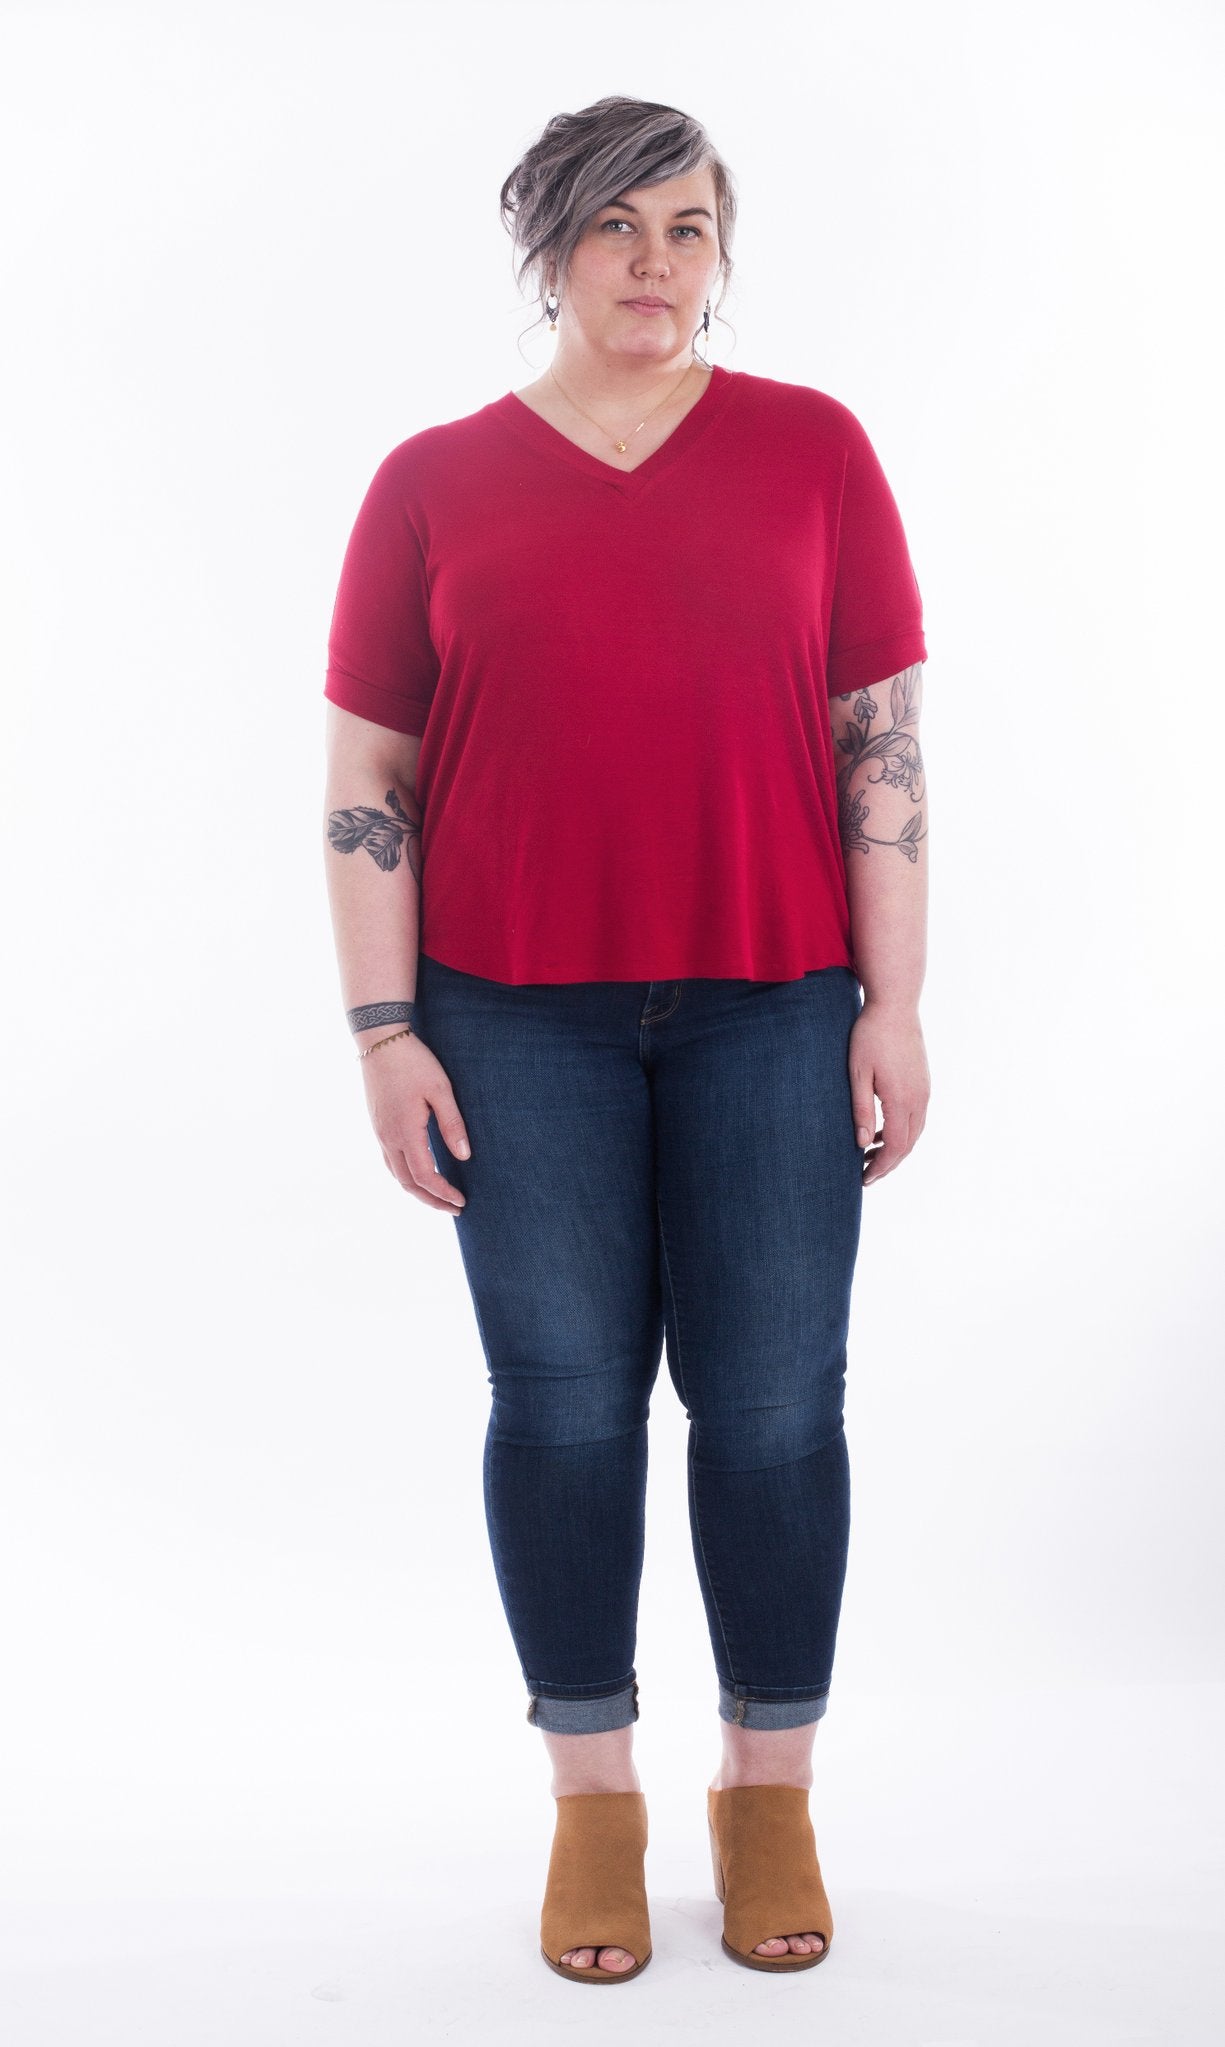 Sew House Seven - Tabor V- Neck Tee / Sweater Sewing Pattern